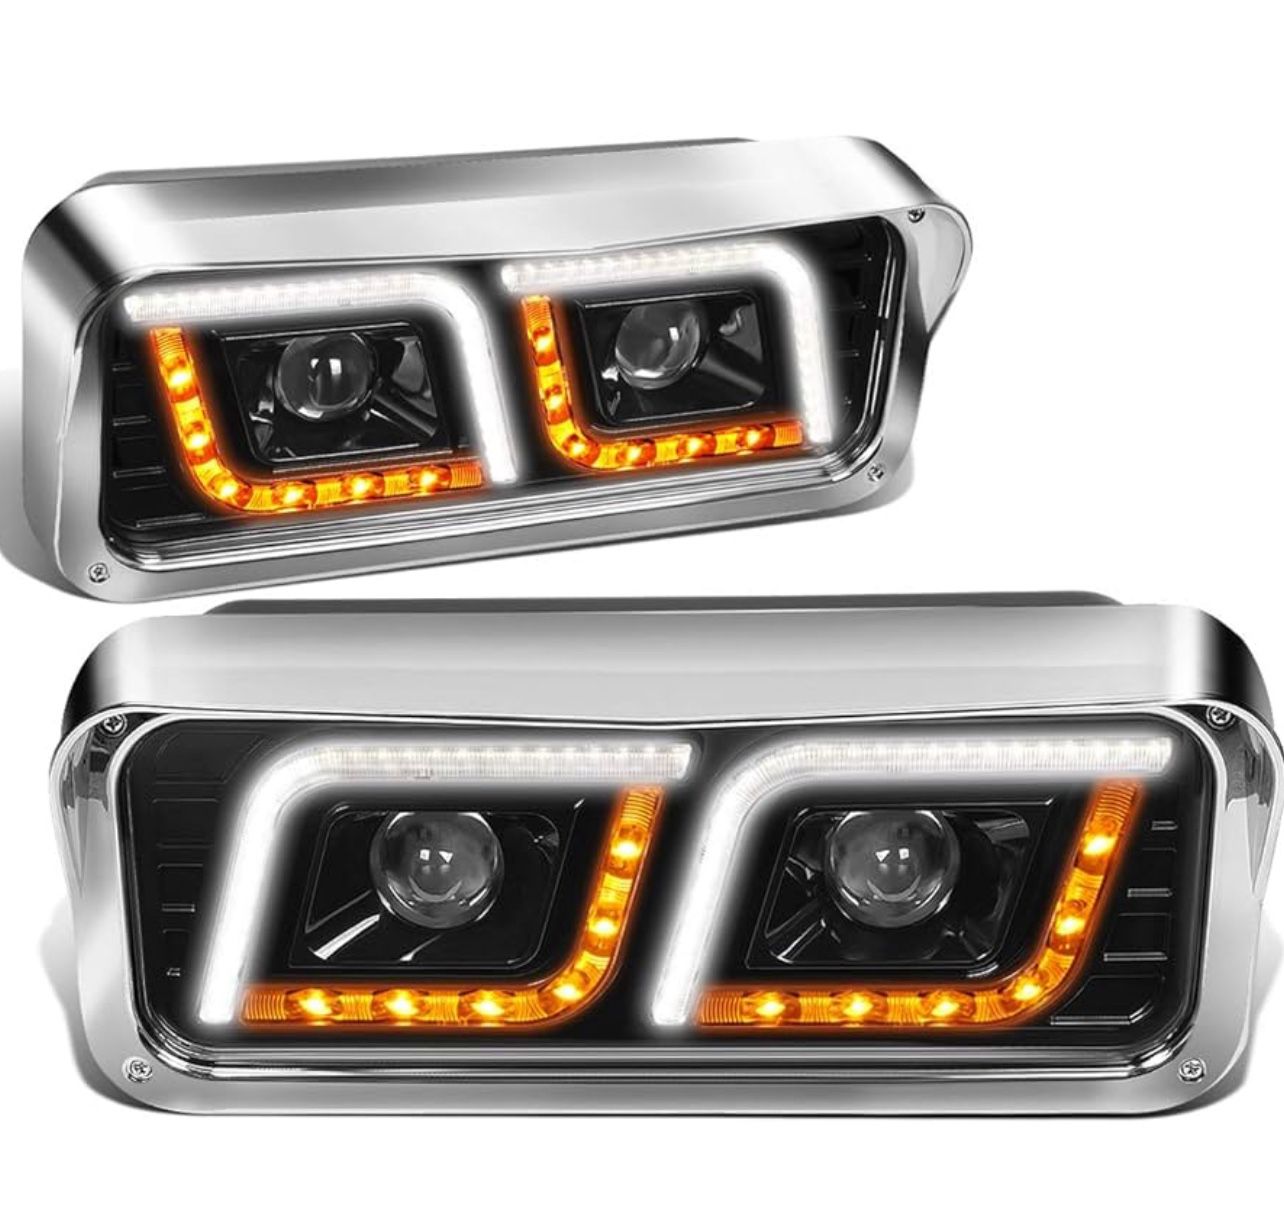 LED DRL Projector Headlights 1(contact info removed) Kenworth W900 Western Star 4800